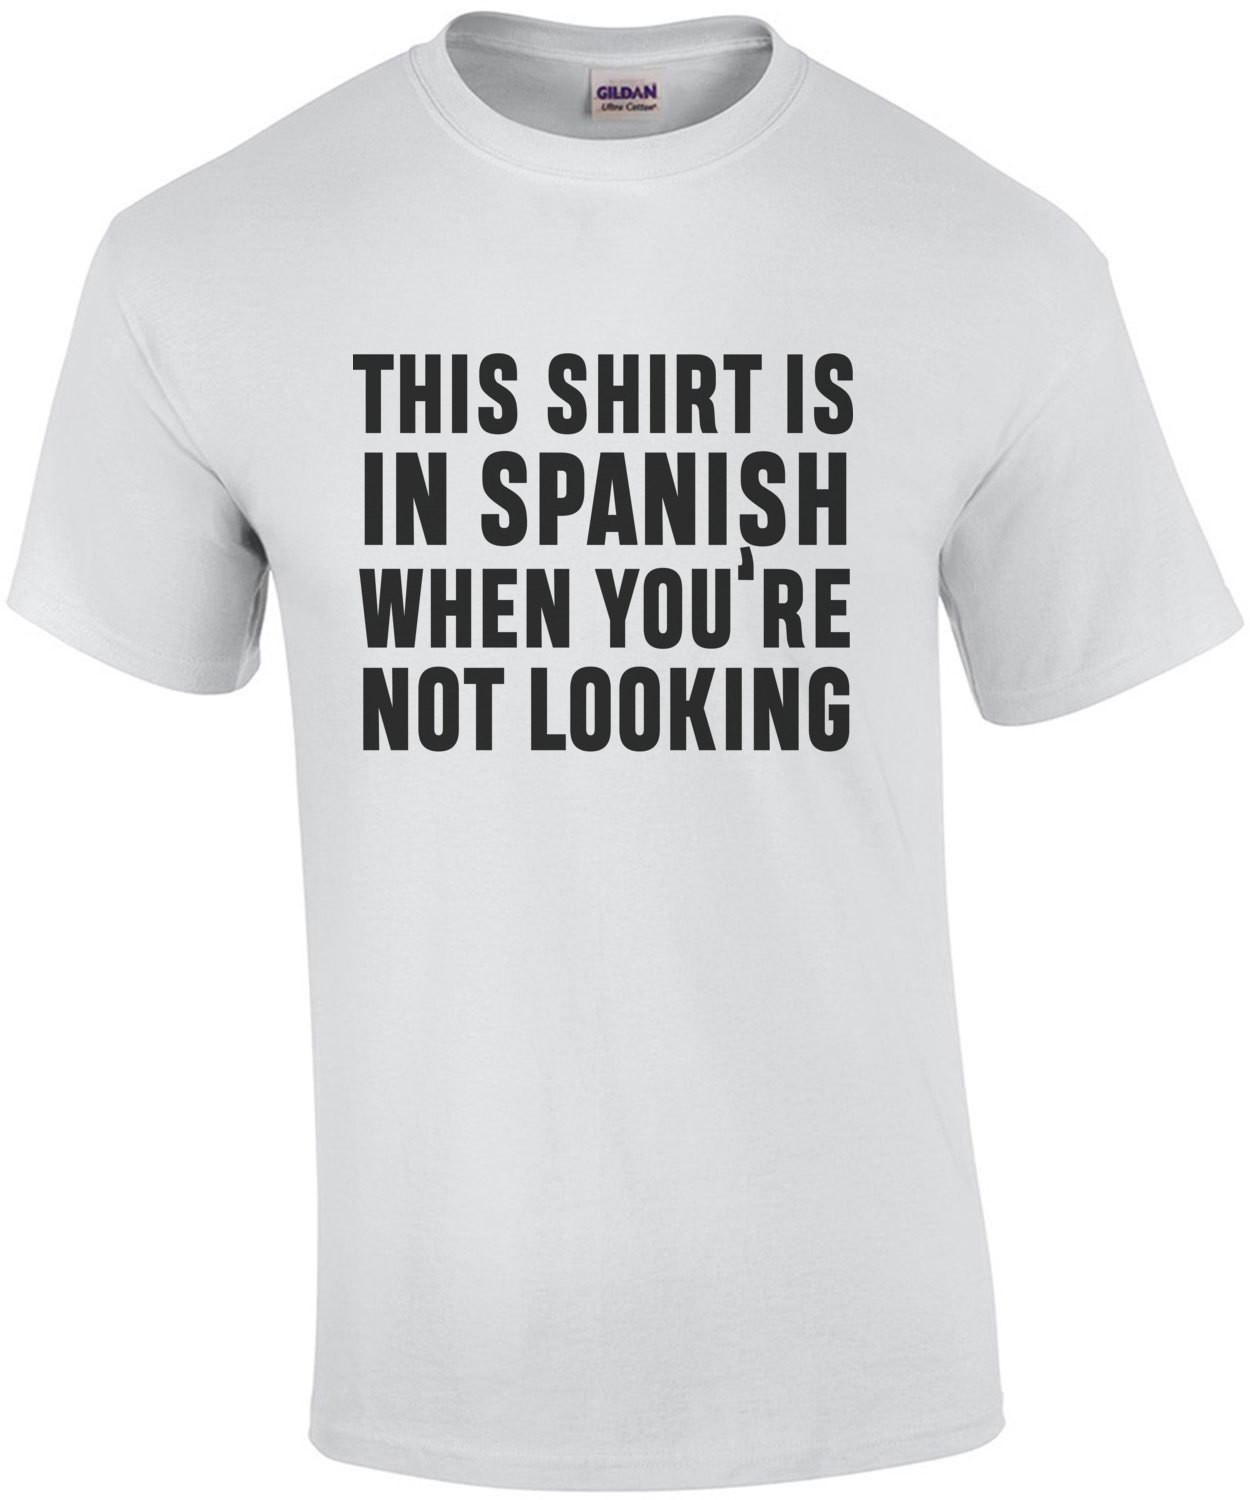 This shirt is in Spanish when you're not looking - sarcastic t-shirt